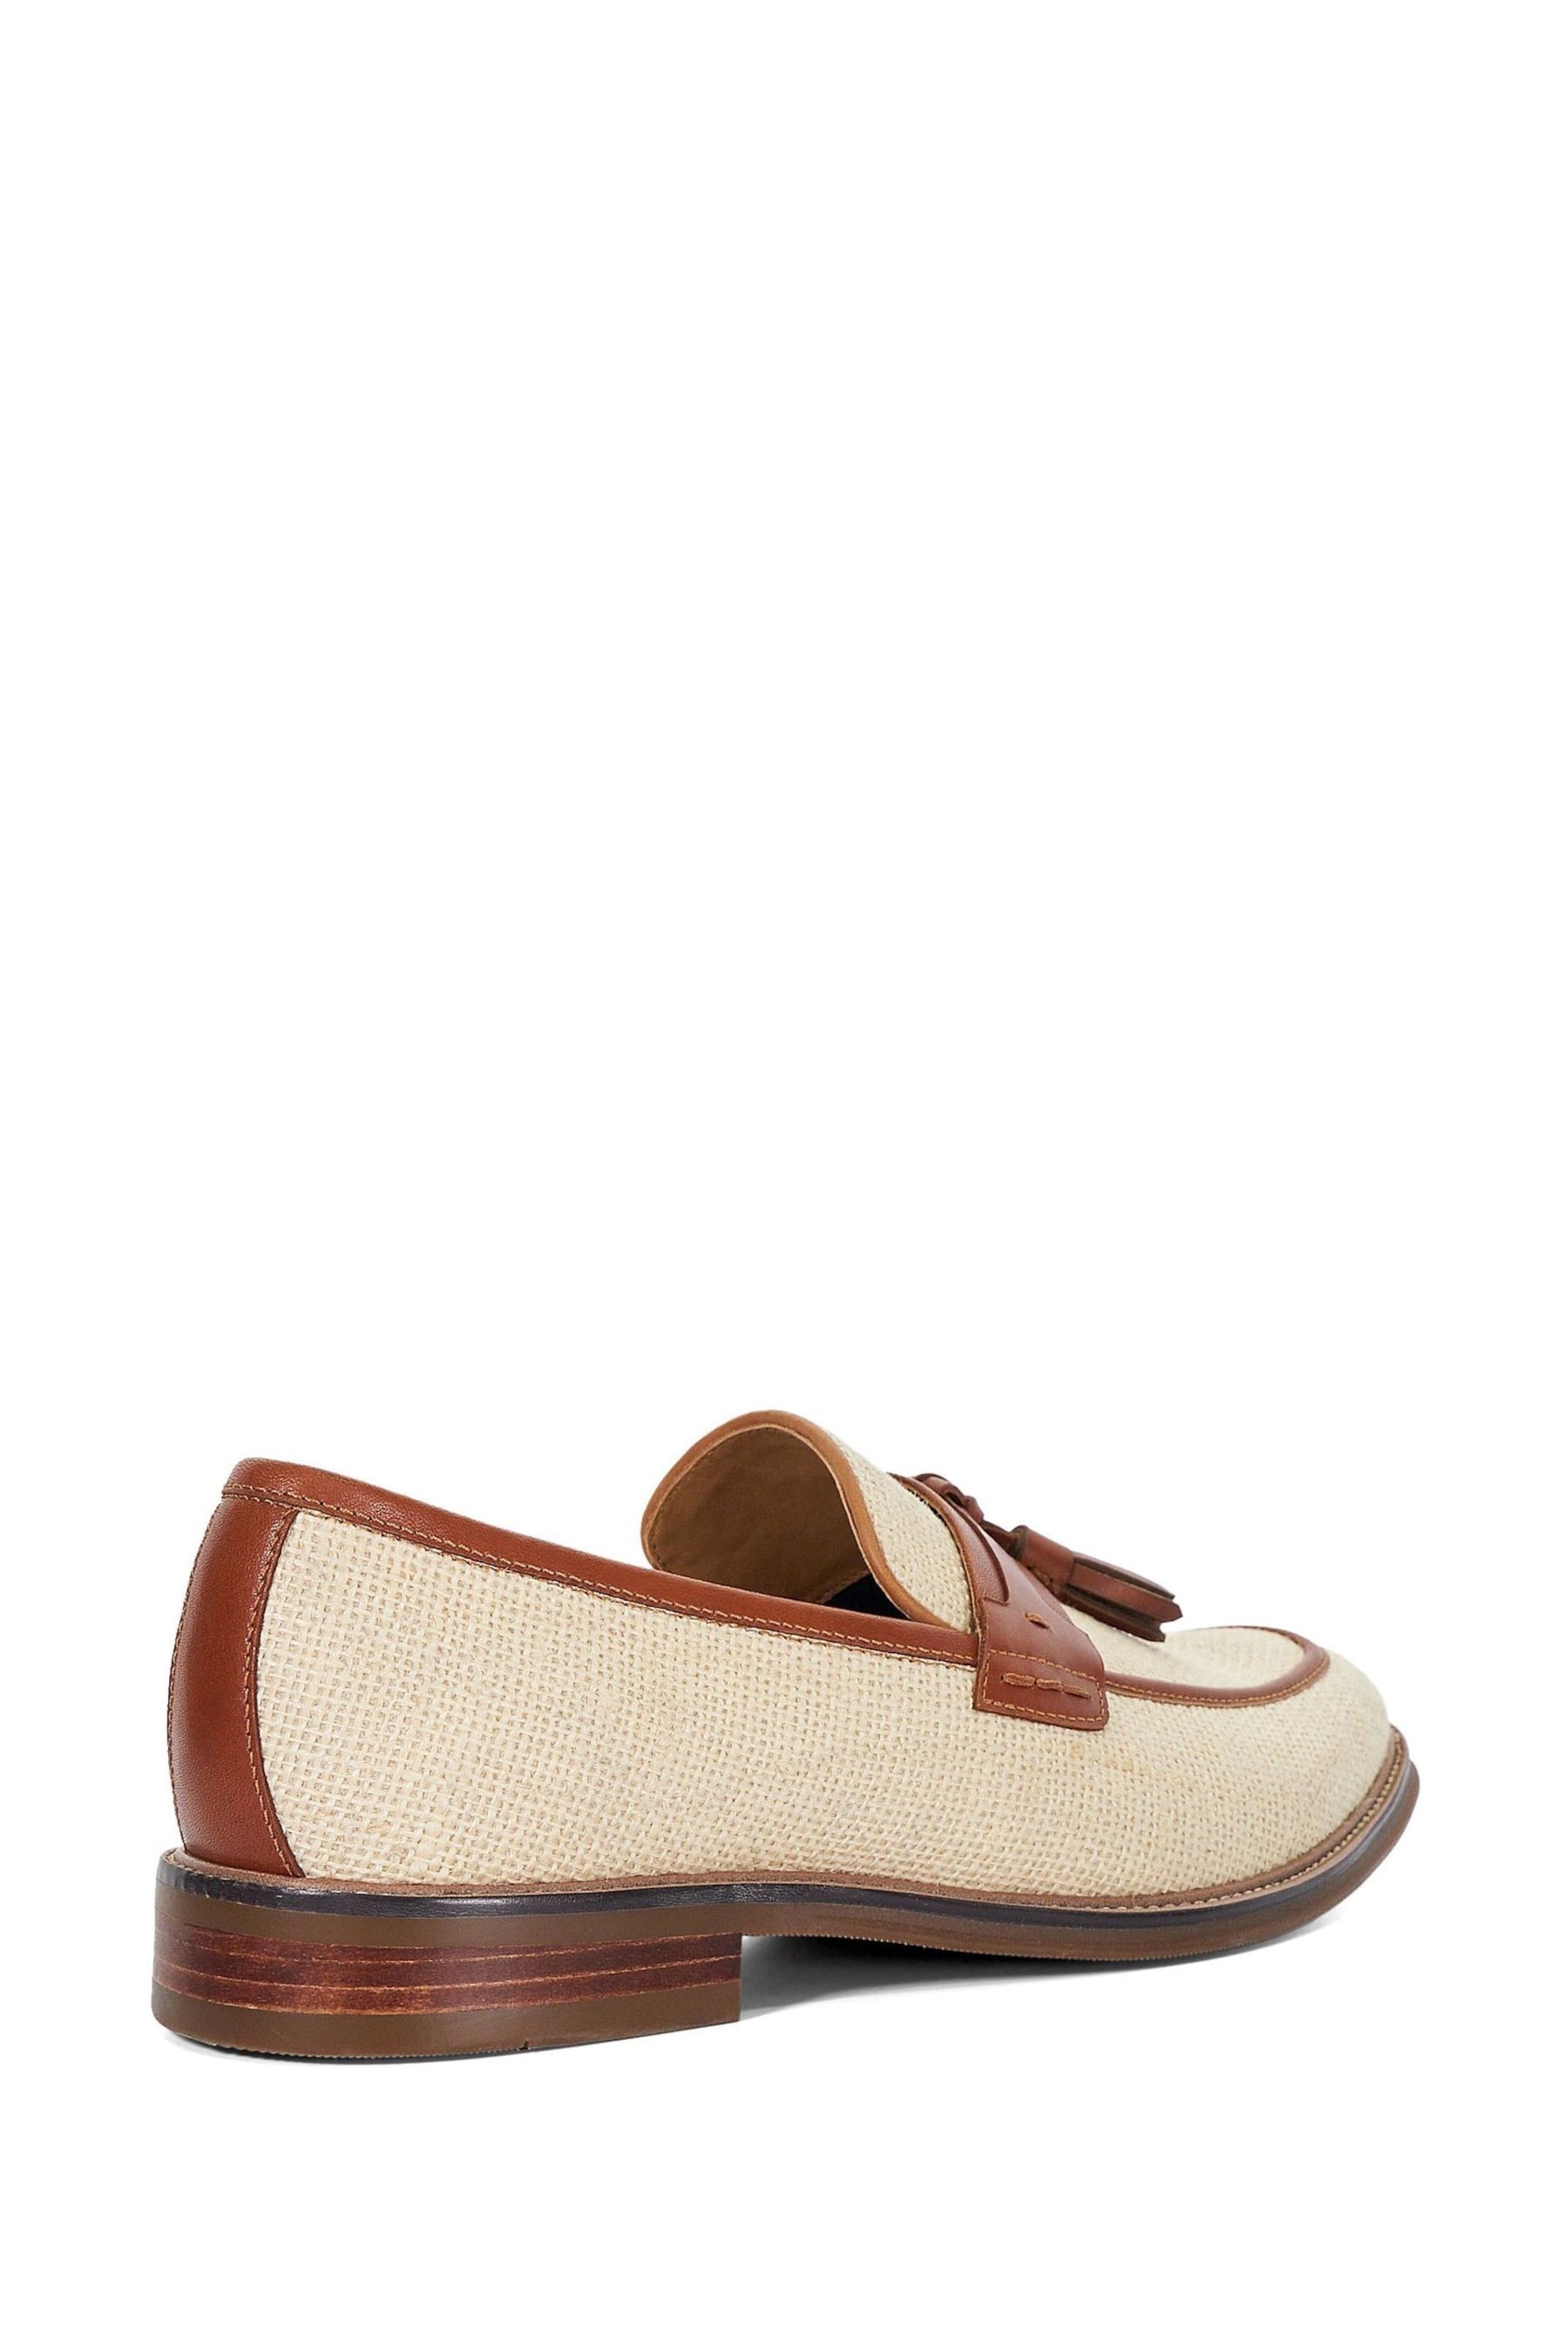 Dune London Brown Sought Mixed Material Loafers - Image 2 of 6